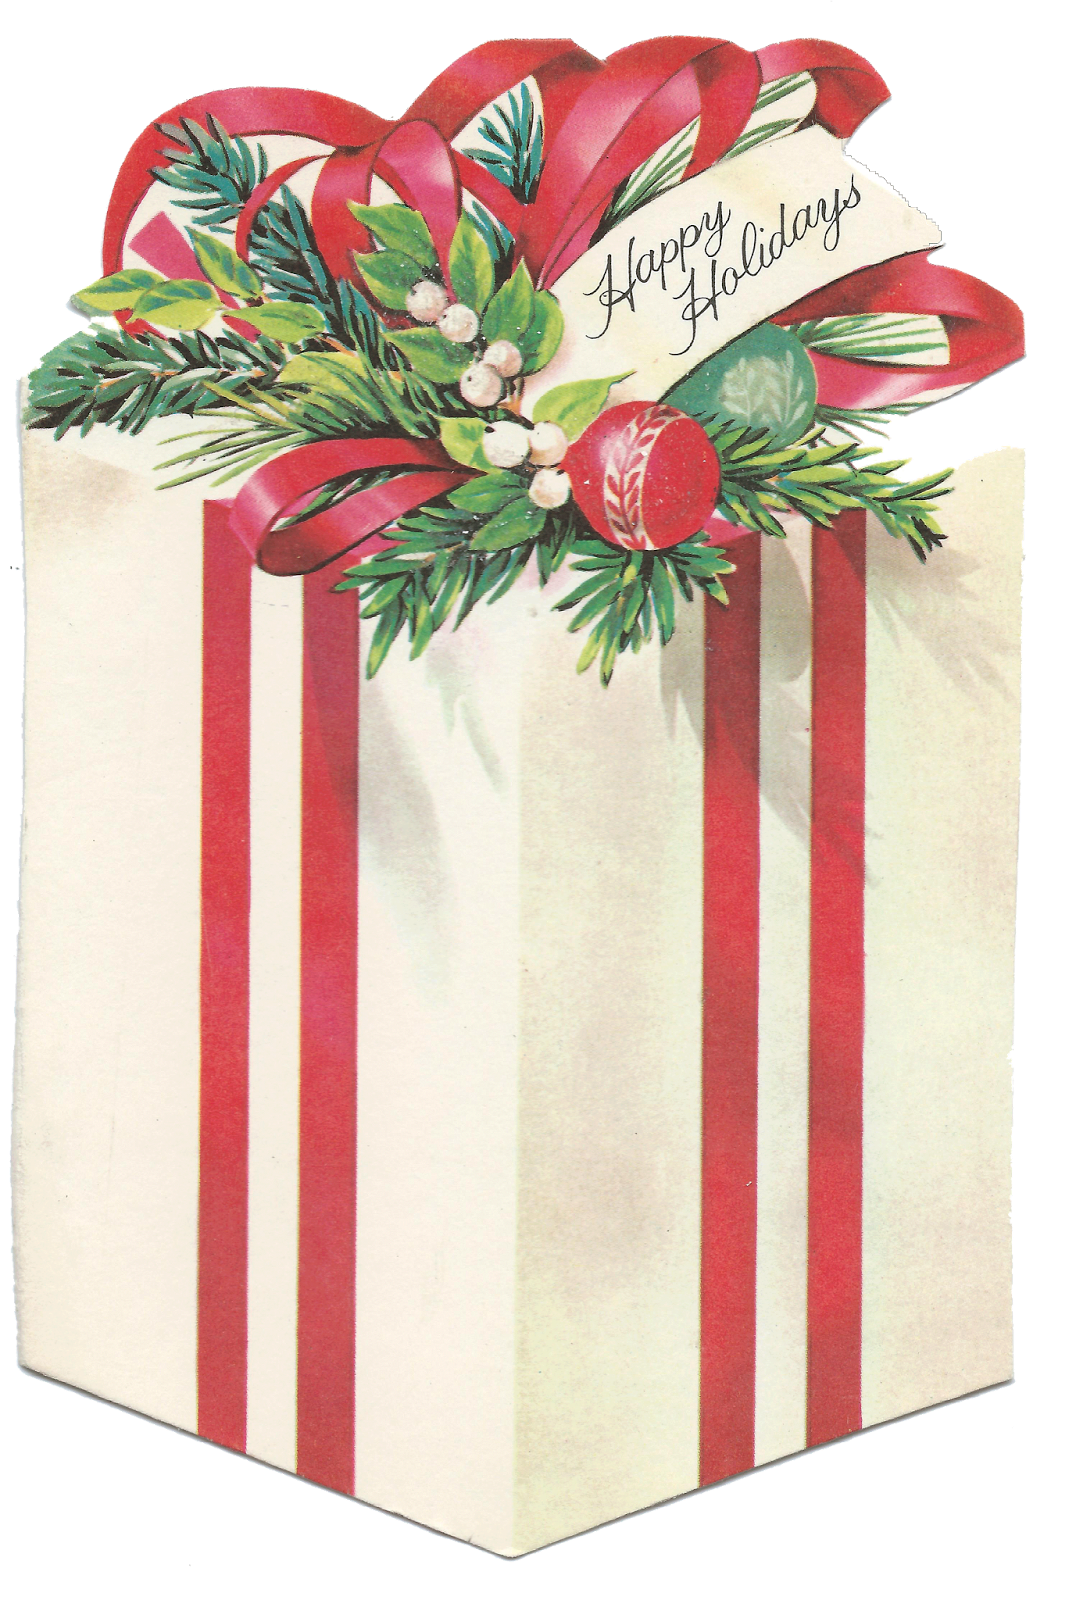 free clipart of christmas presents - photo #38